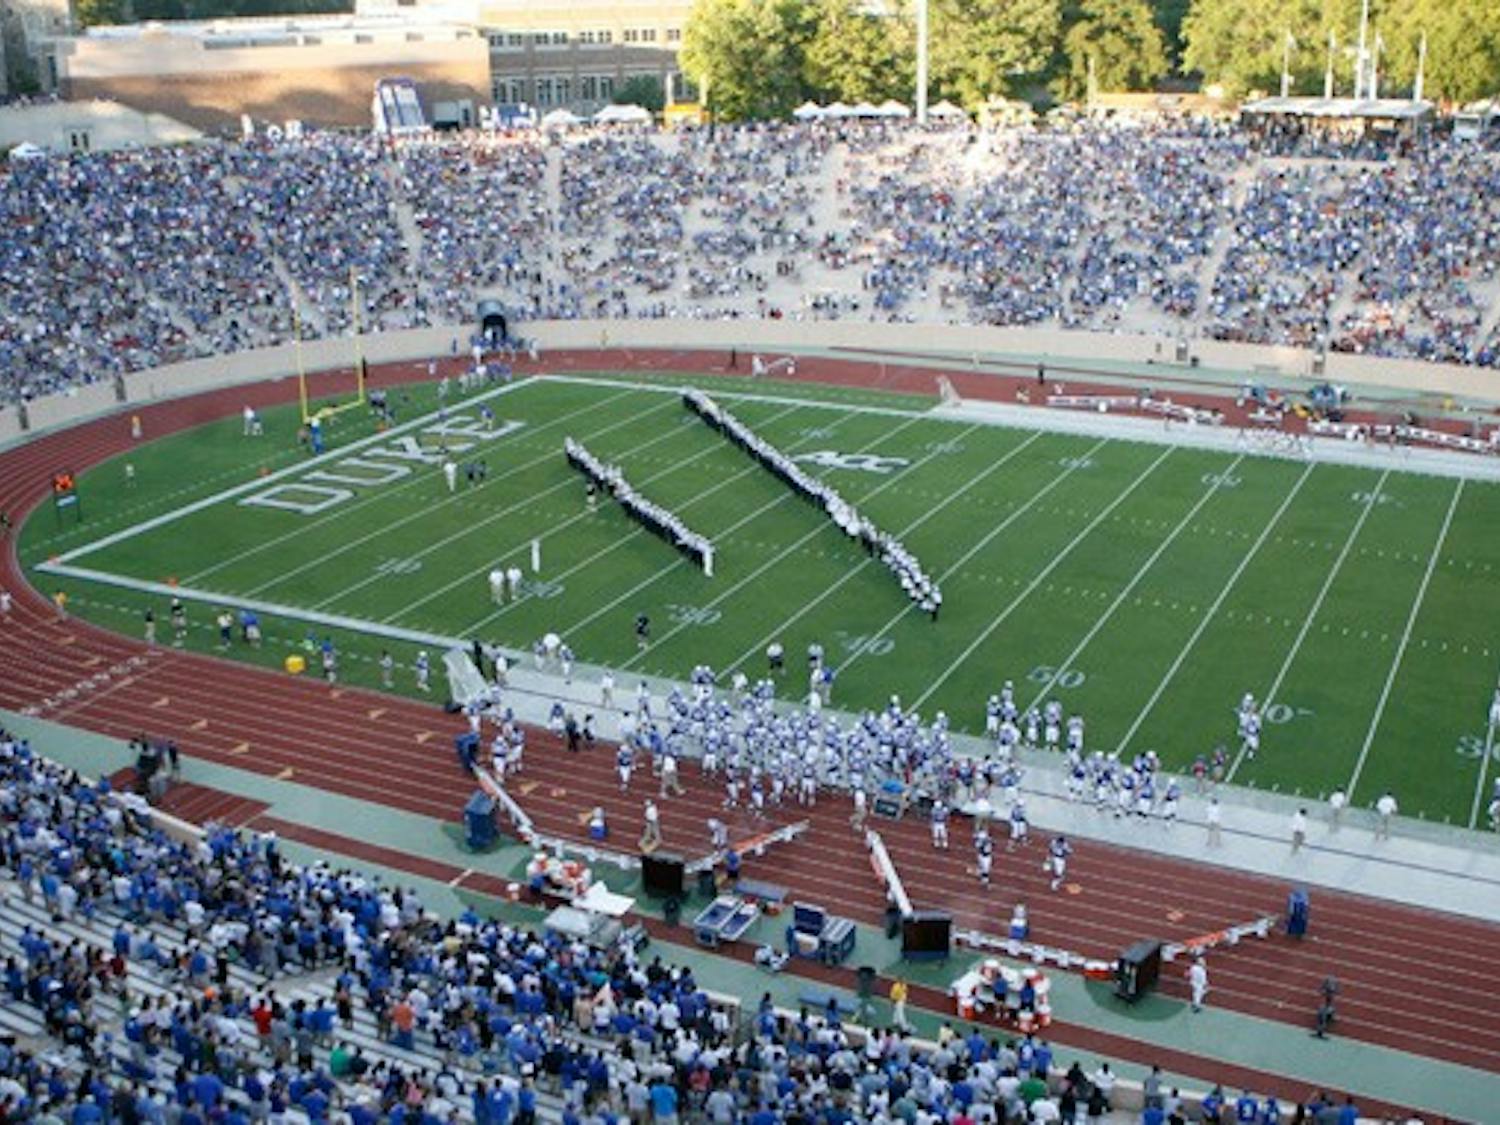 Duke Athletics will begin a $100 million fundraising campaign this Spring that will run three to five years and enable expansions to Wallace Wade Stadium and renovations to Cameron Indoor Stadium.